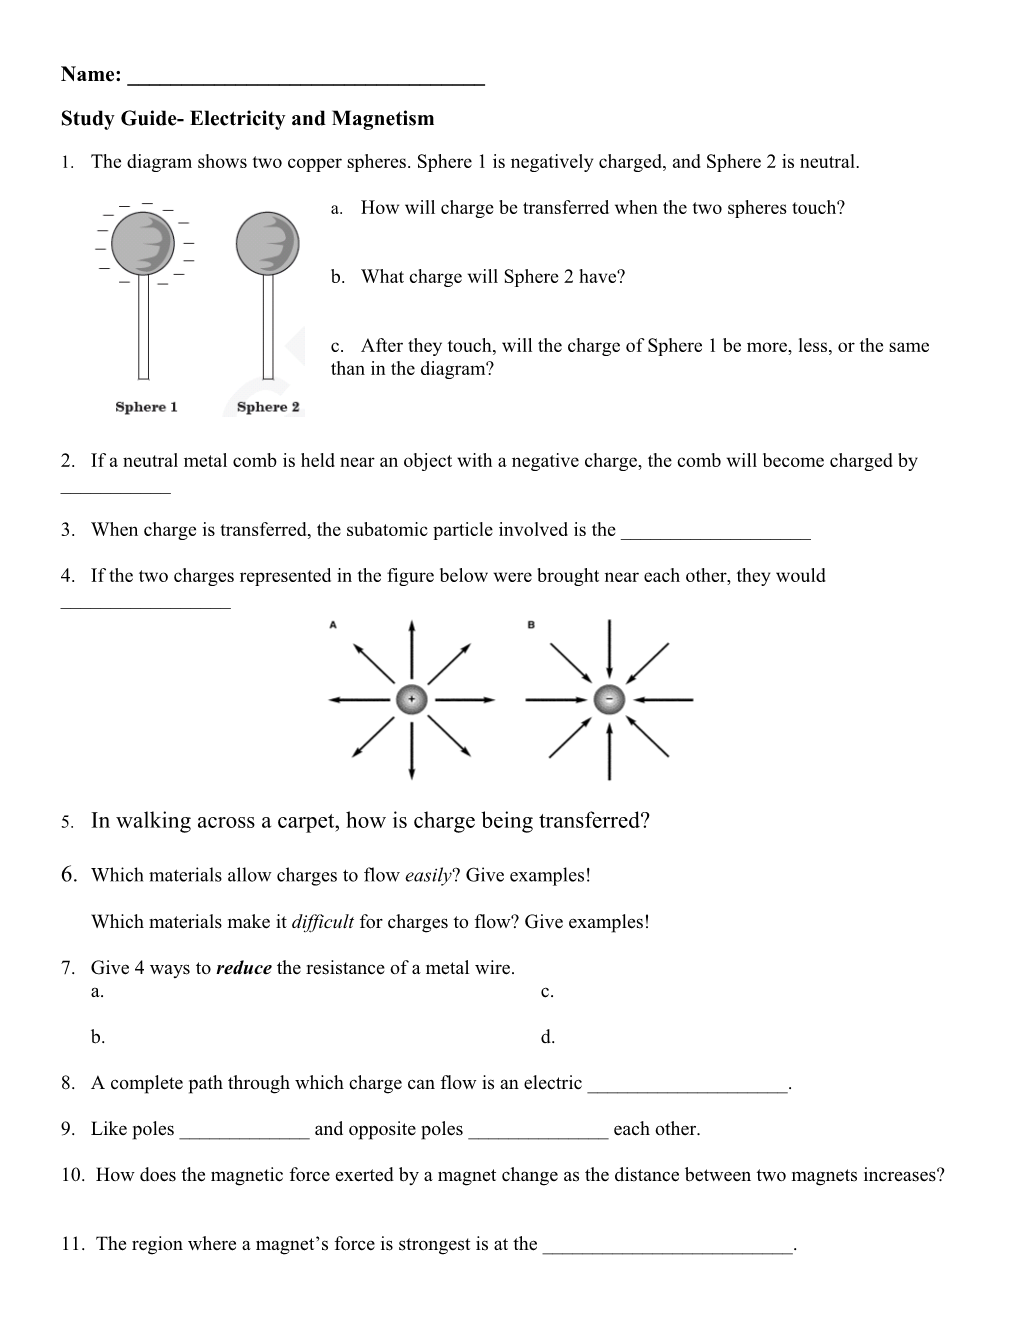 Study Guide- Electricity and Magnetism